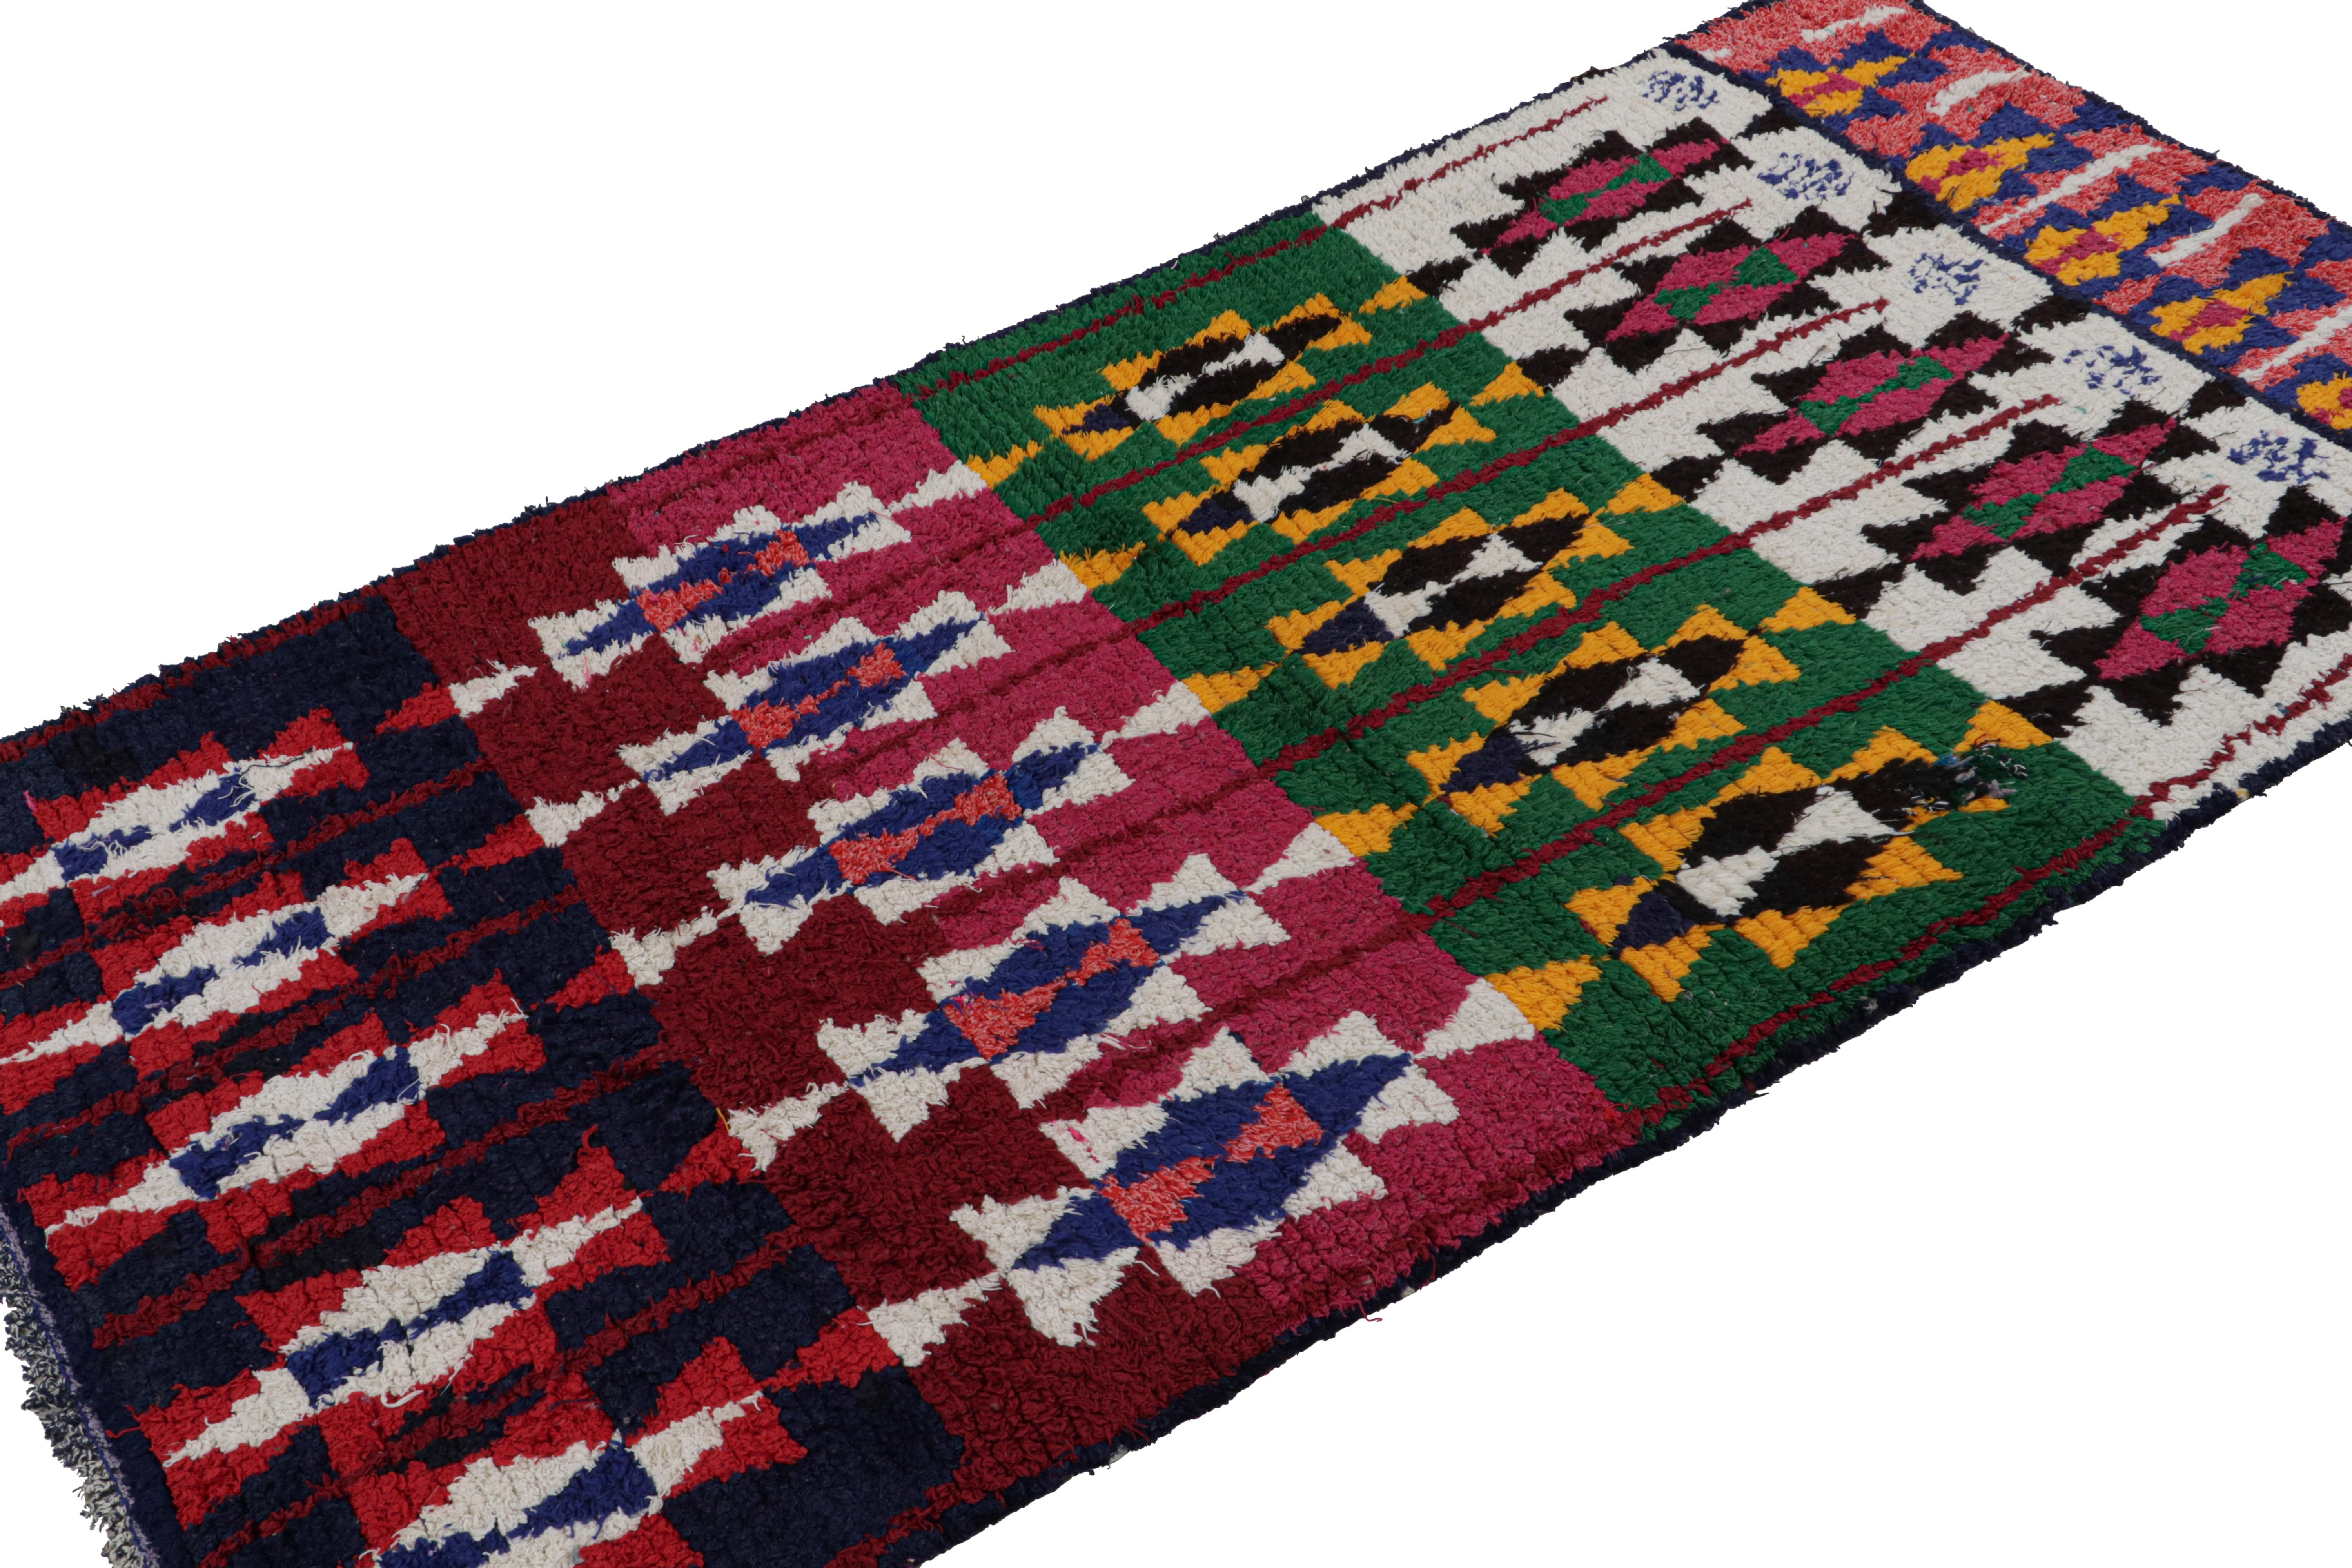 Hand-knotted in wool and fabric circa 1950-1960, this vintage 4x8 Moroccan Boucherouite rug is believed to hail from the Azilal tribe. 

On the Design: 

This rug enjoys a whimsical play of red, blue, pink, green and gold in the geometric patterns.